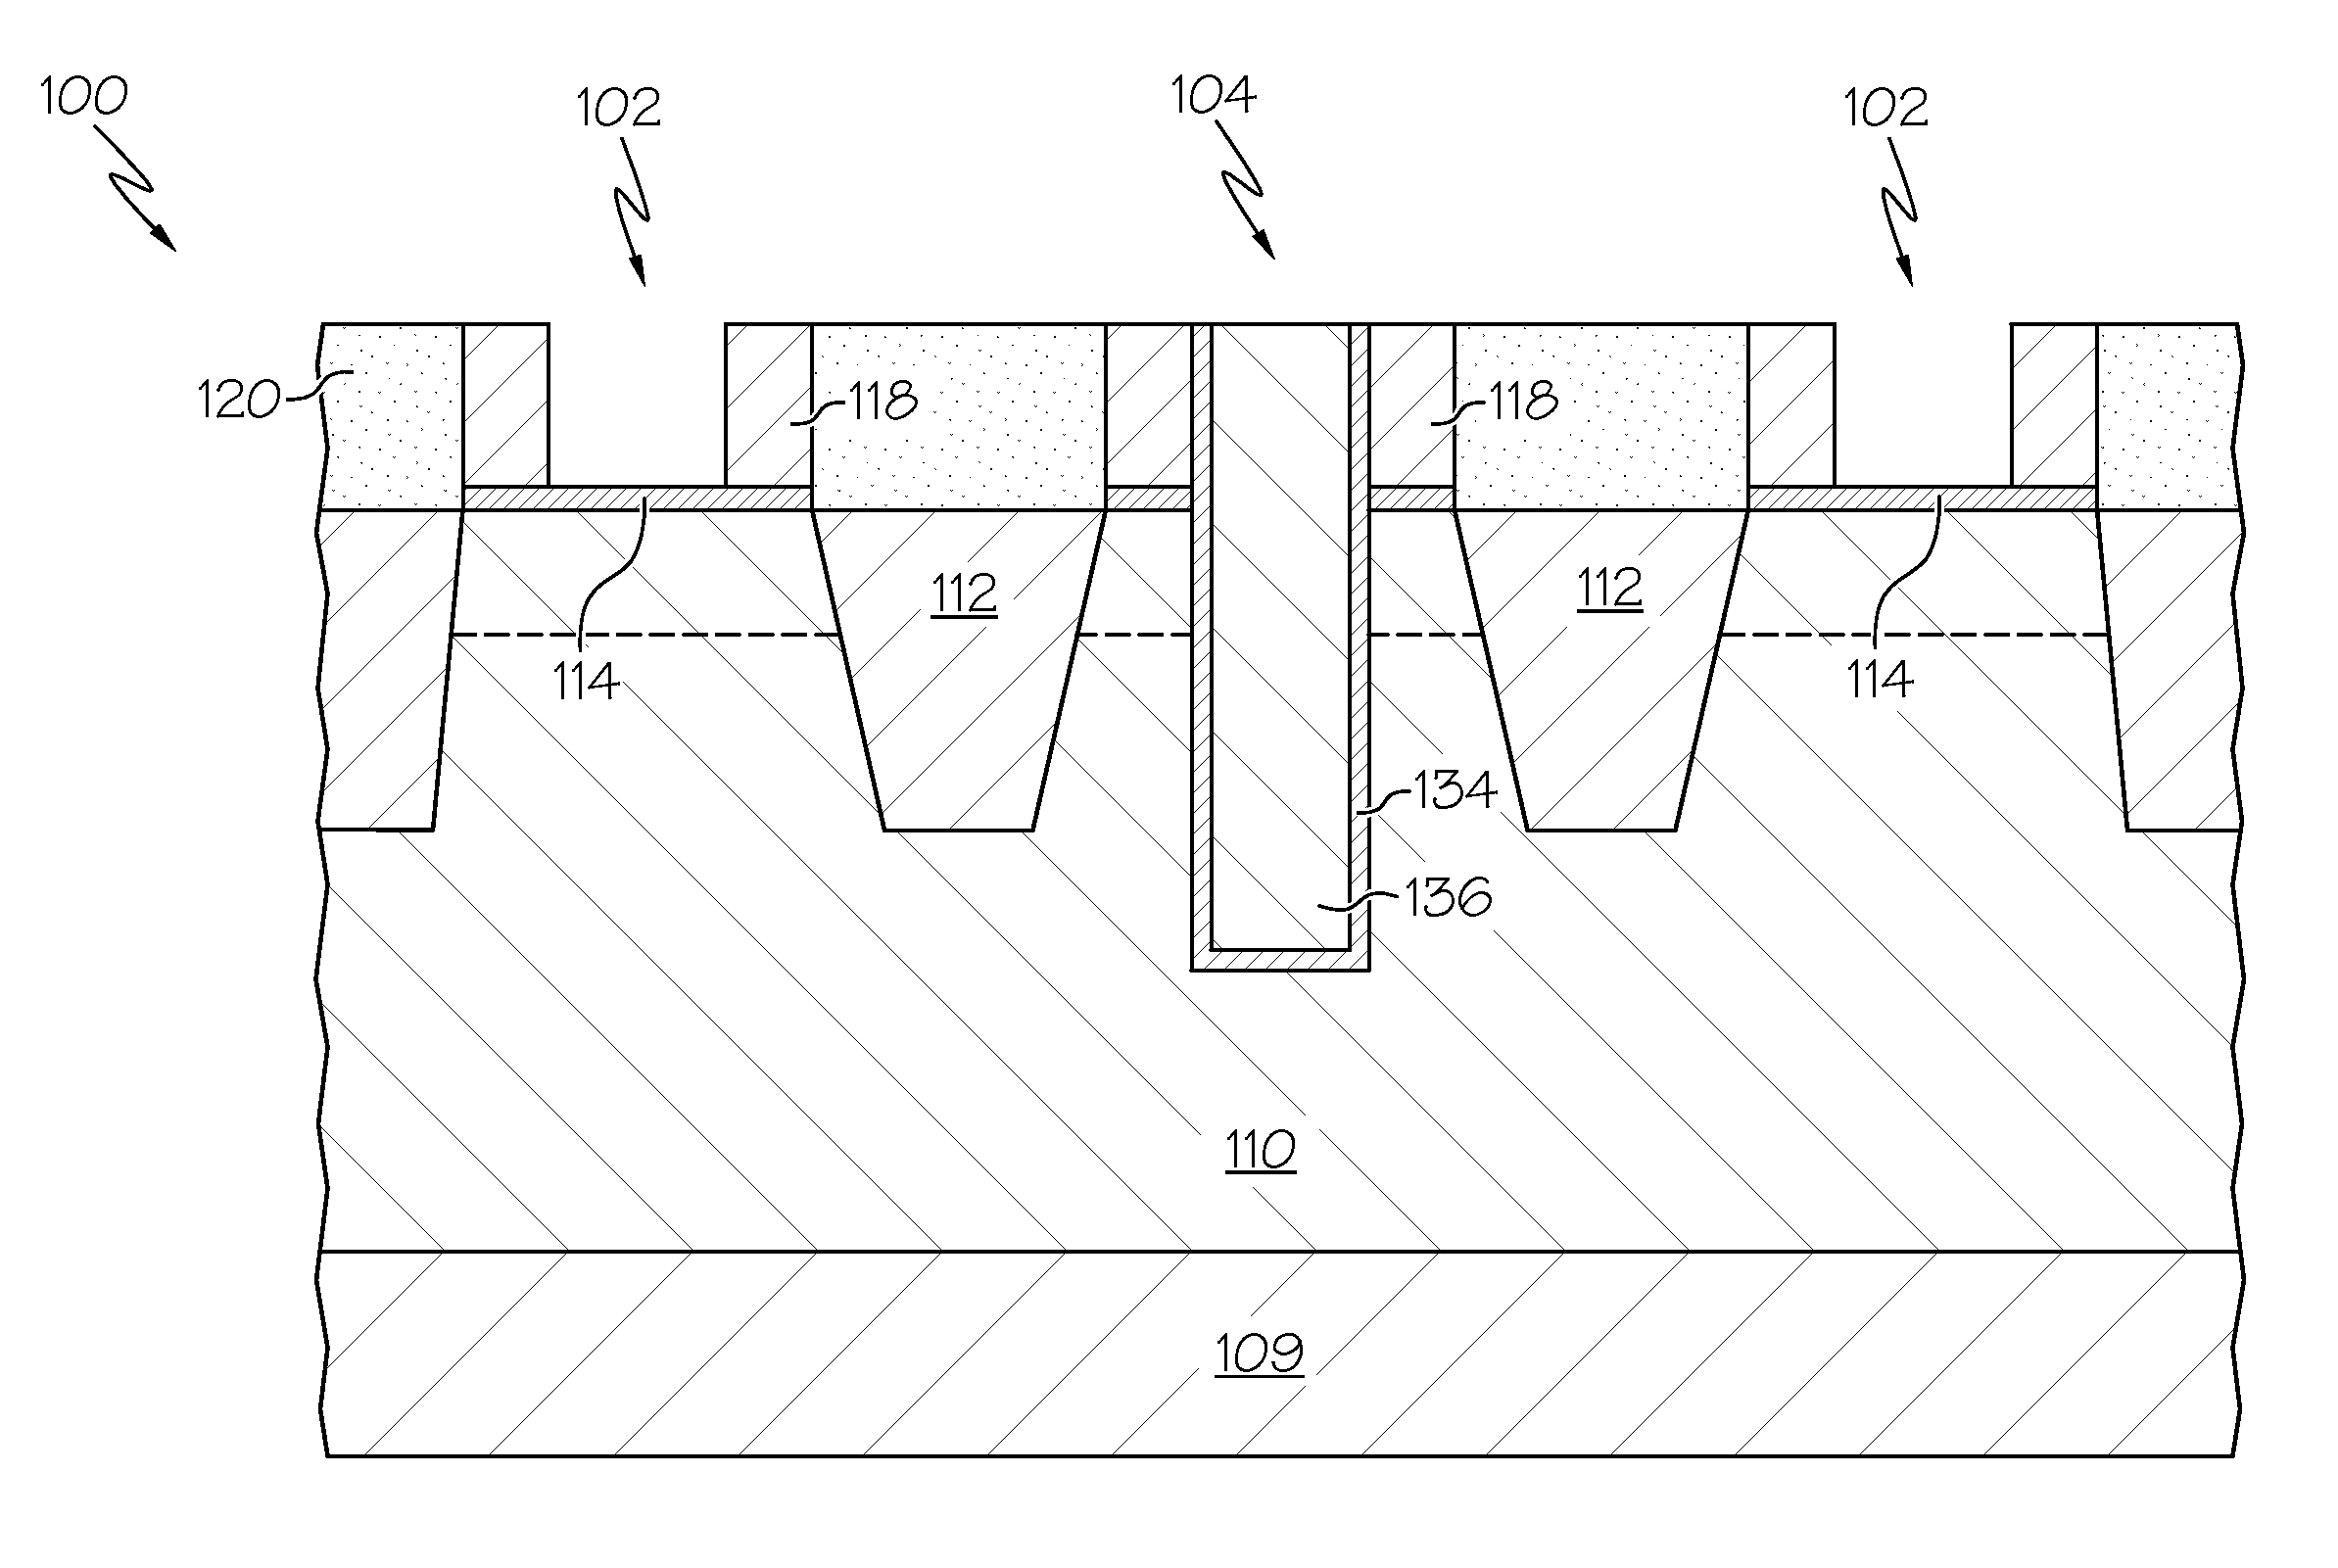 Replacement metal gate diffusion break formation